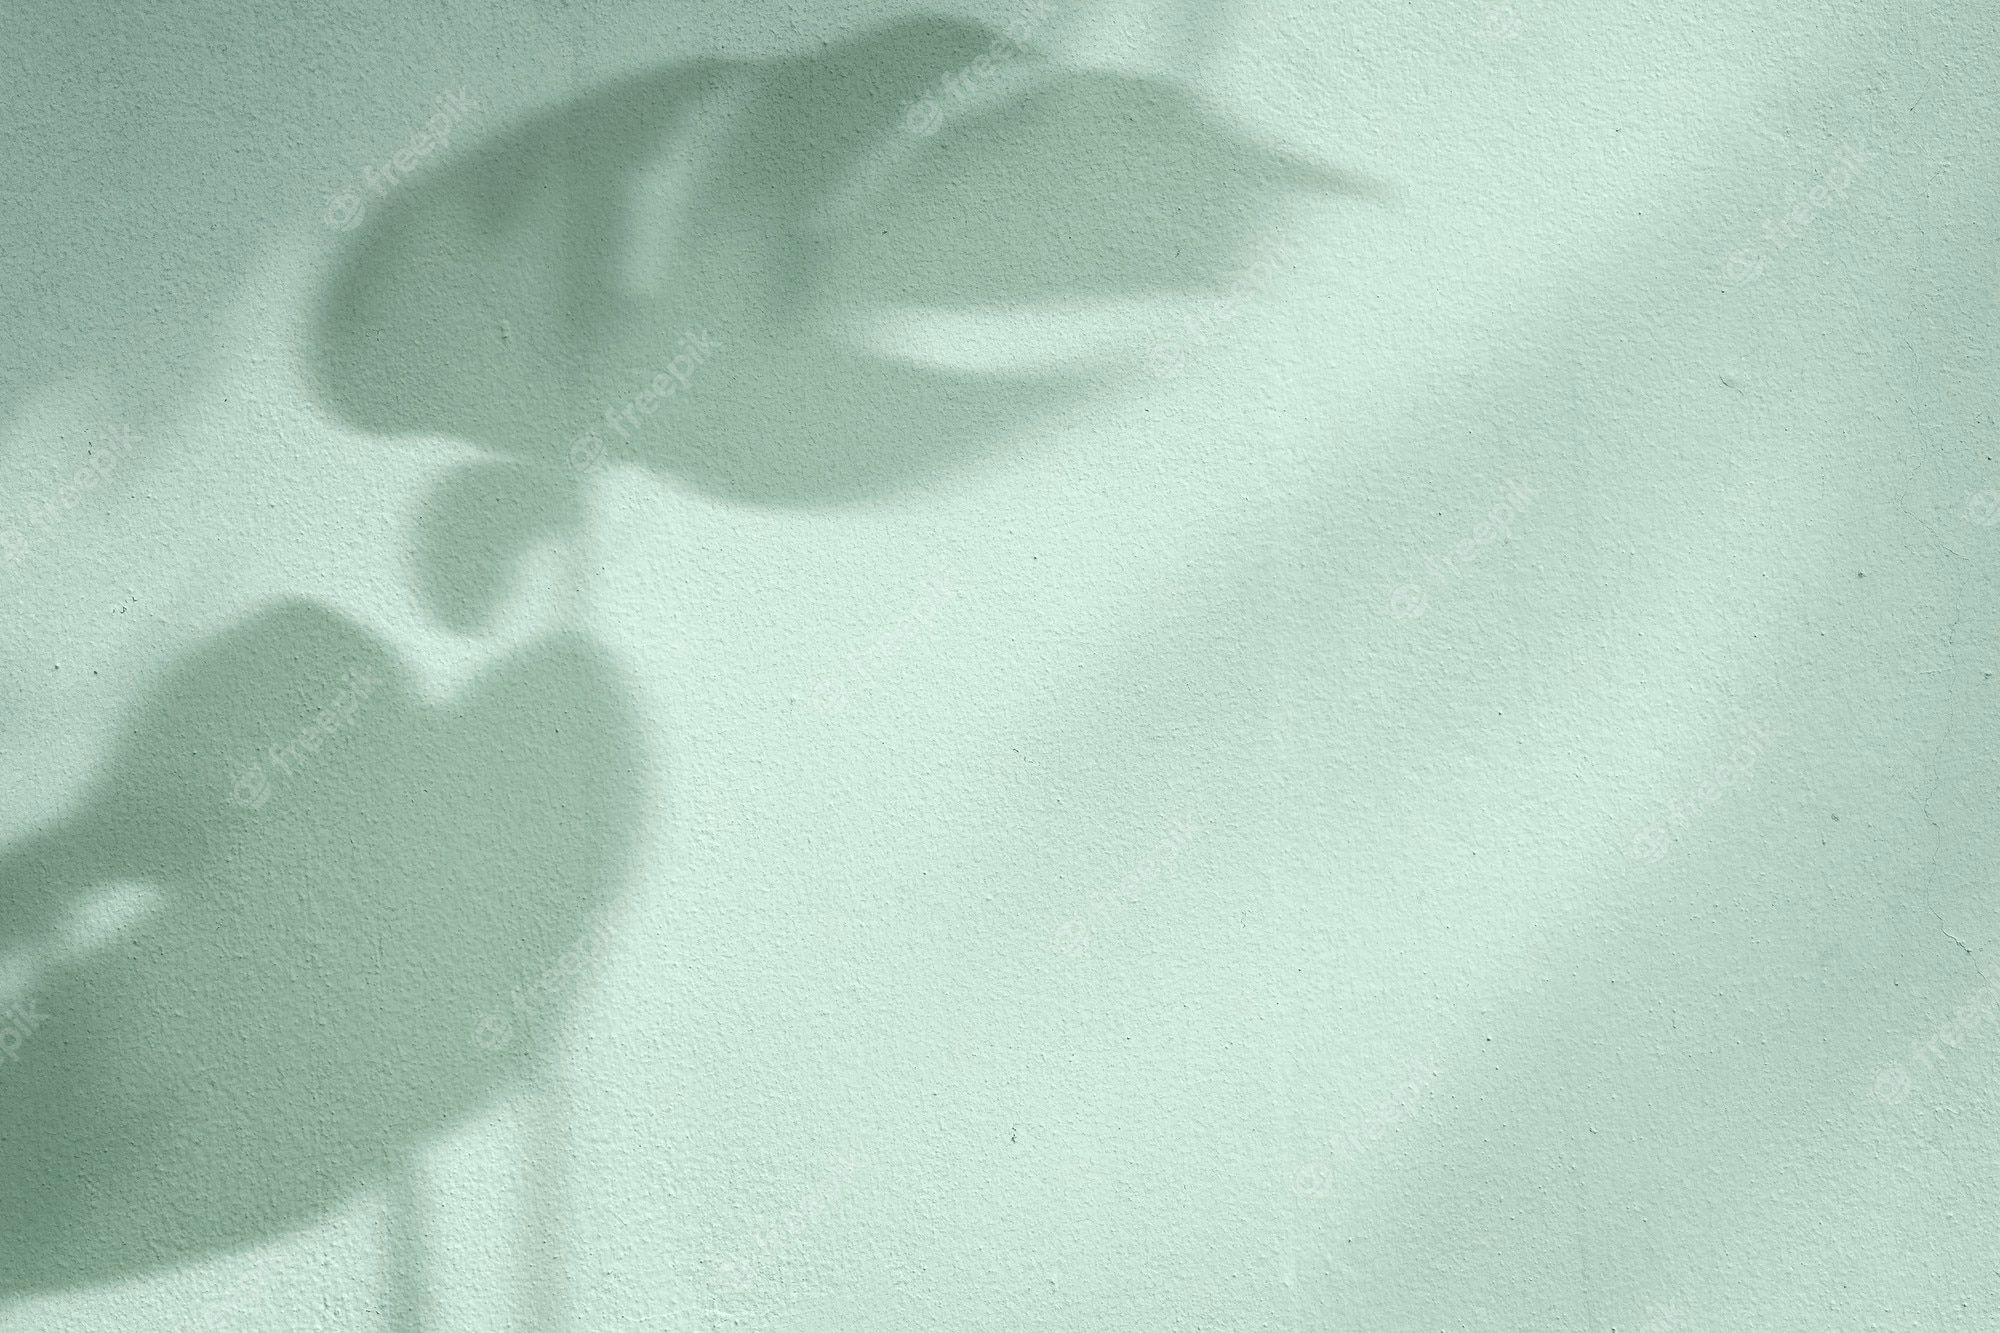 Shadow of monstera leaves on a white wall. Green Aesthetic Image - Mint green